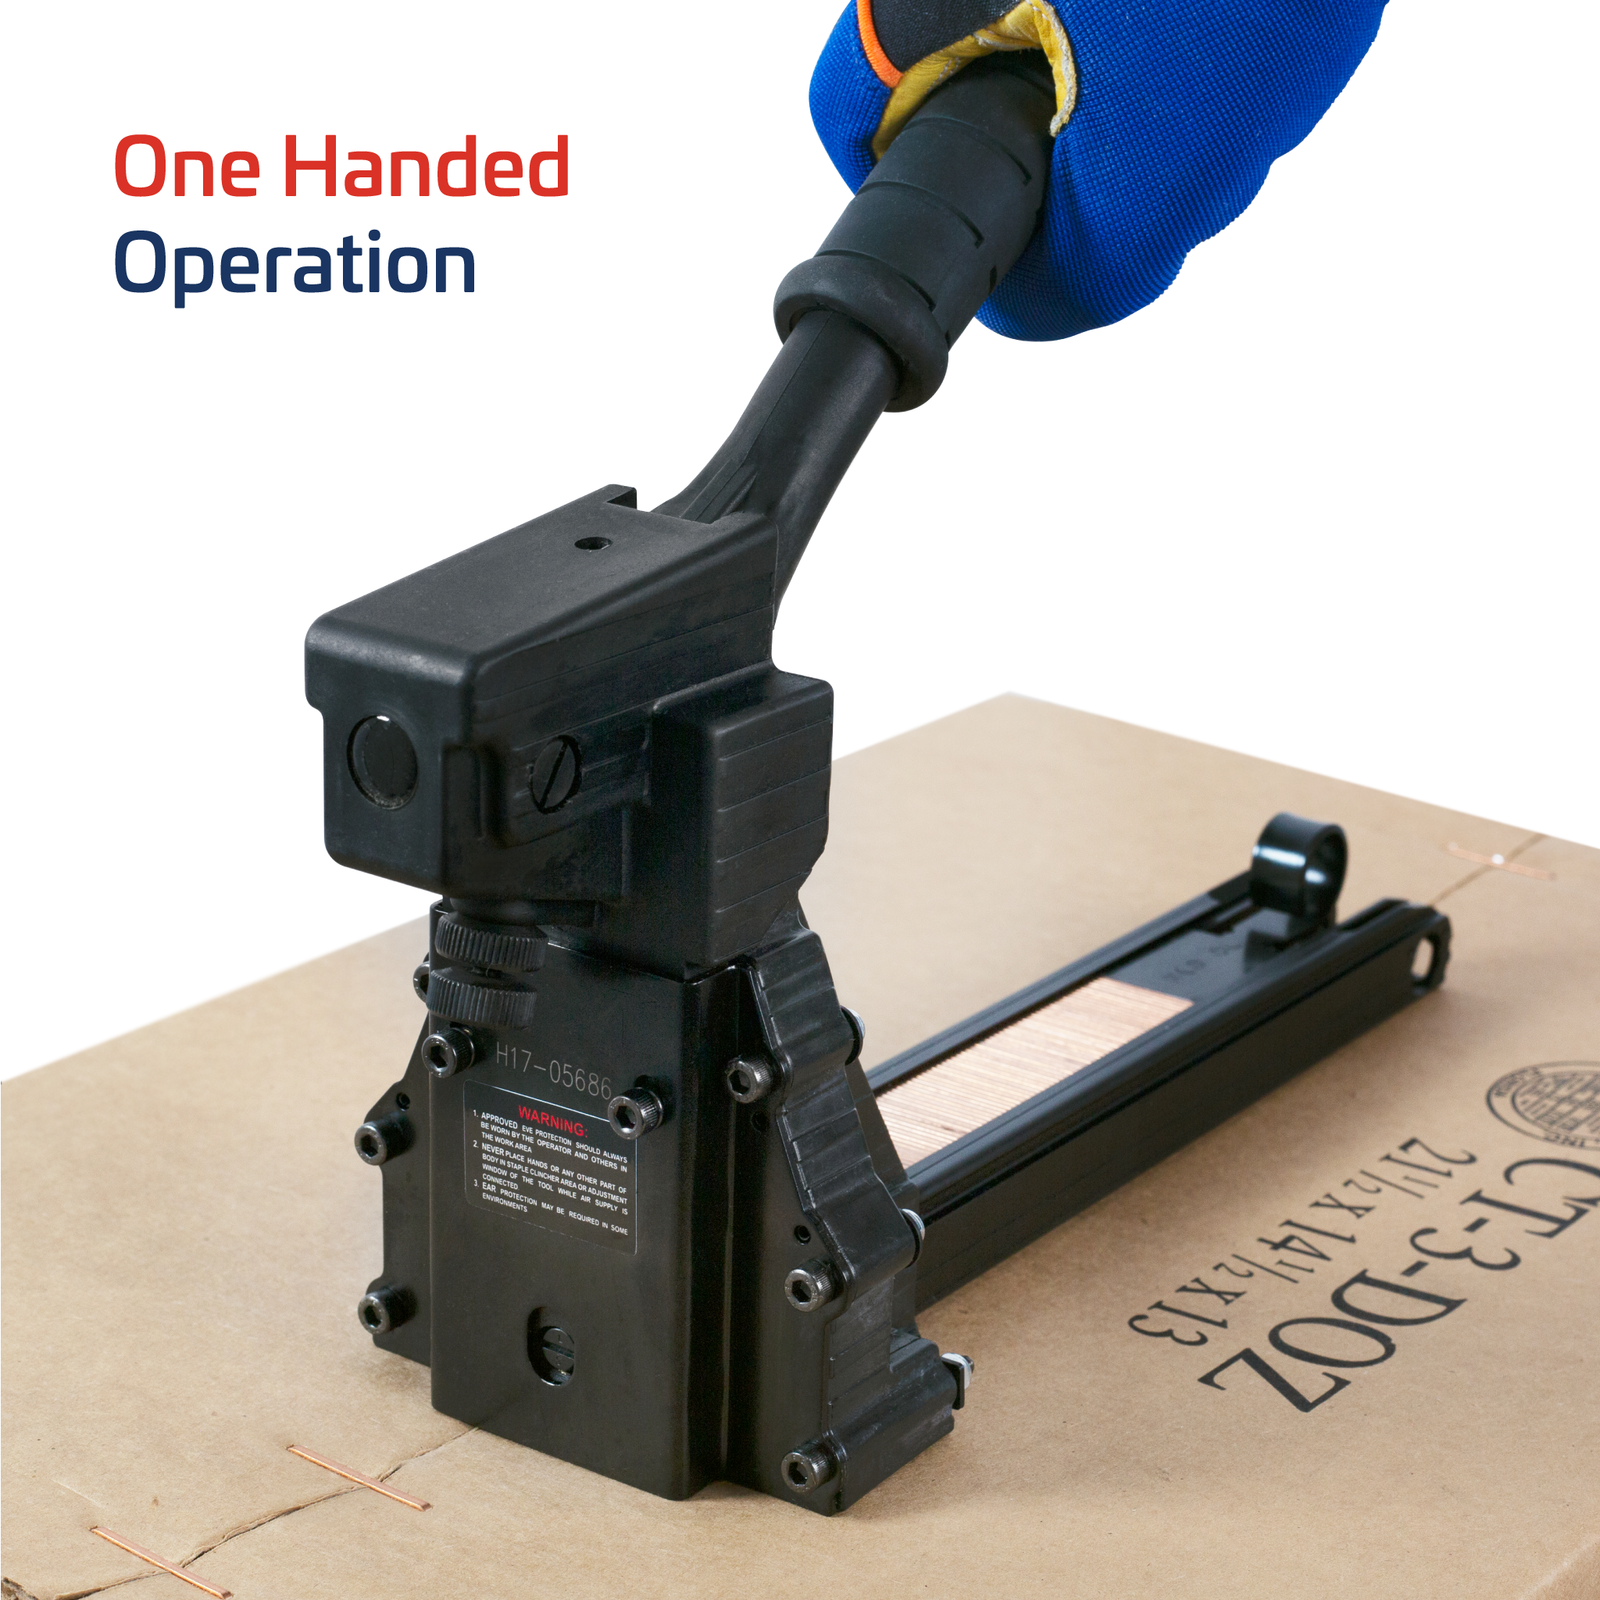 operator wearing blue gloves holding onto black handle stapling boxes. image states in blue/red 